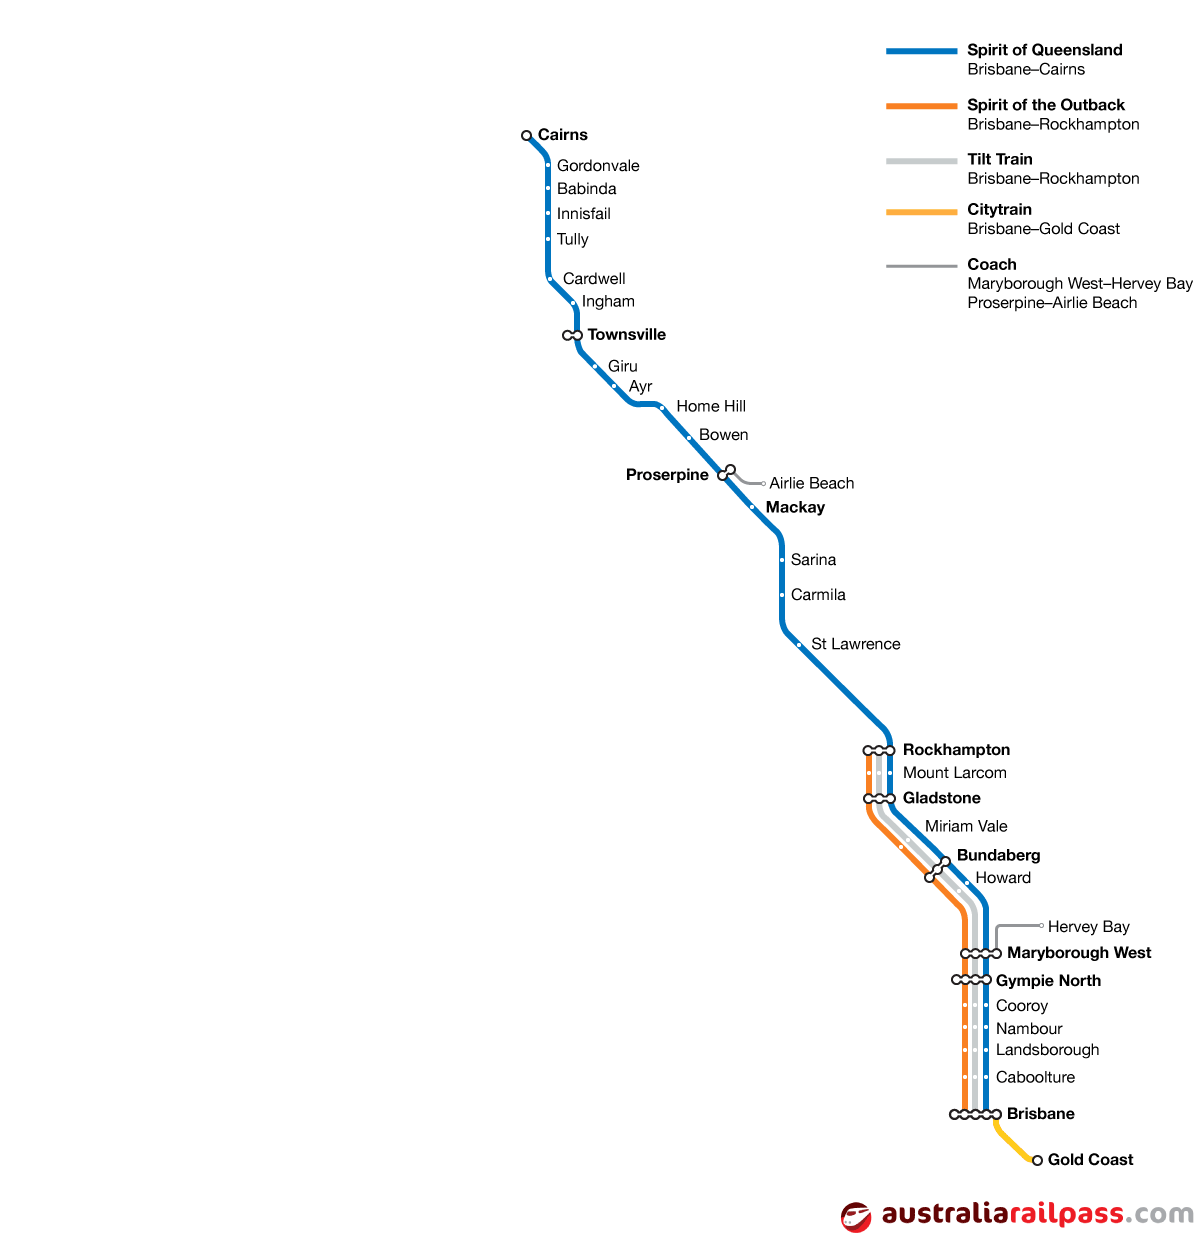 Map of rail lines covered by the Queensland Coastal Pass rail pass